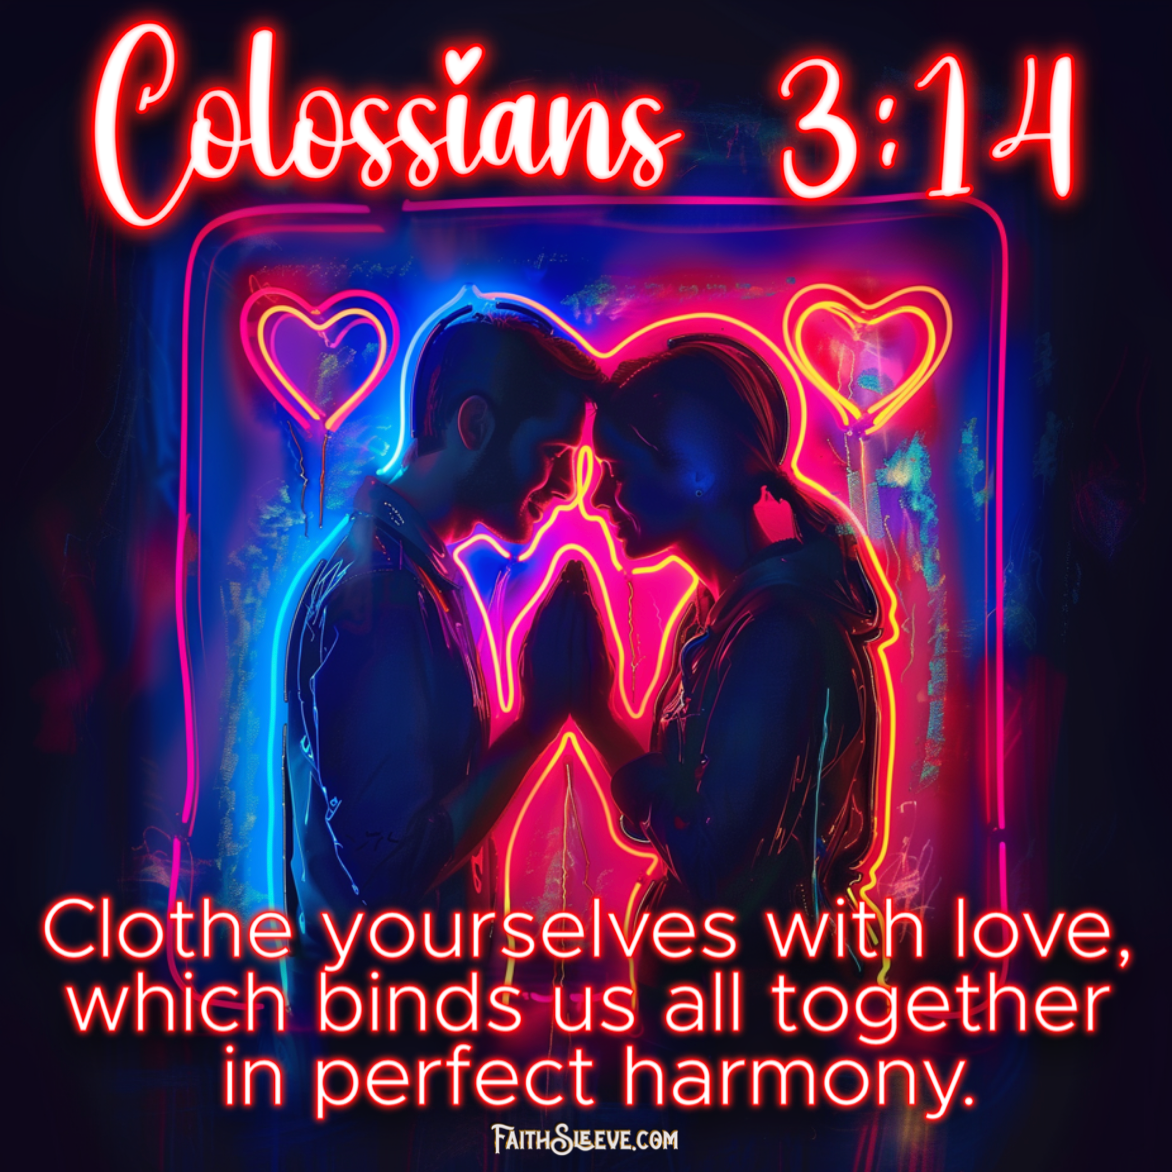 Colossians 3:14 Bible Verse - Clothe Yourselves with Love